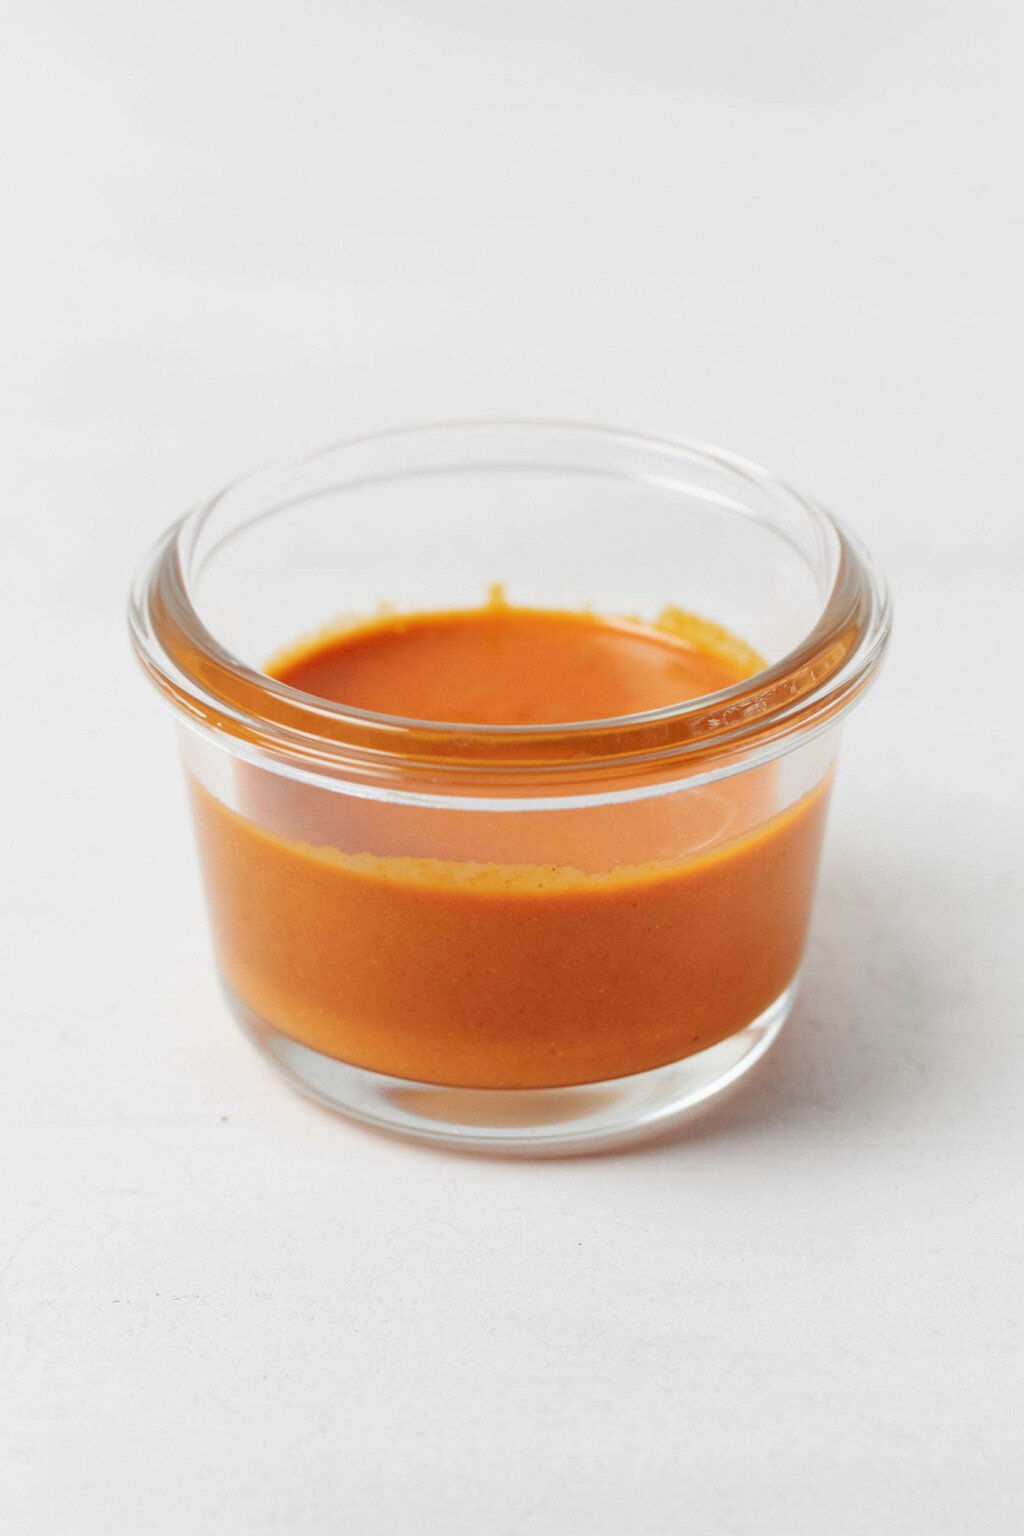 A small, glass container with an orange sauce is resting on a white container.